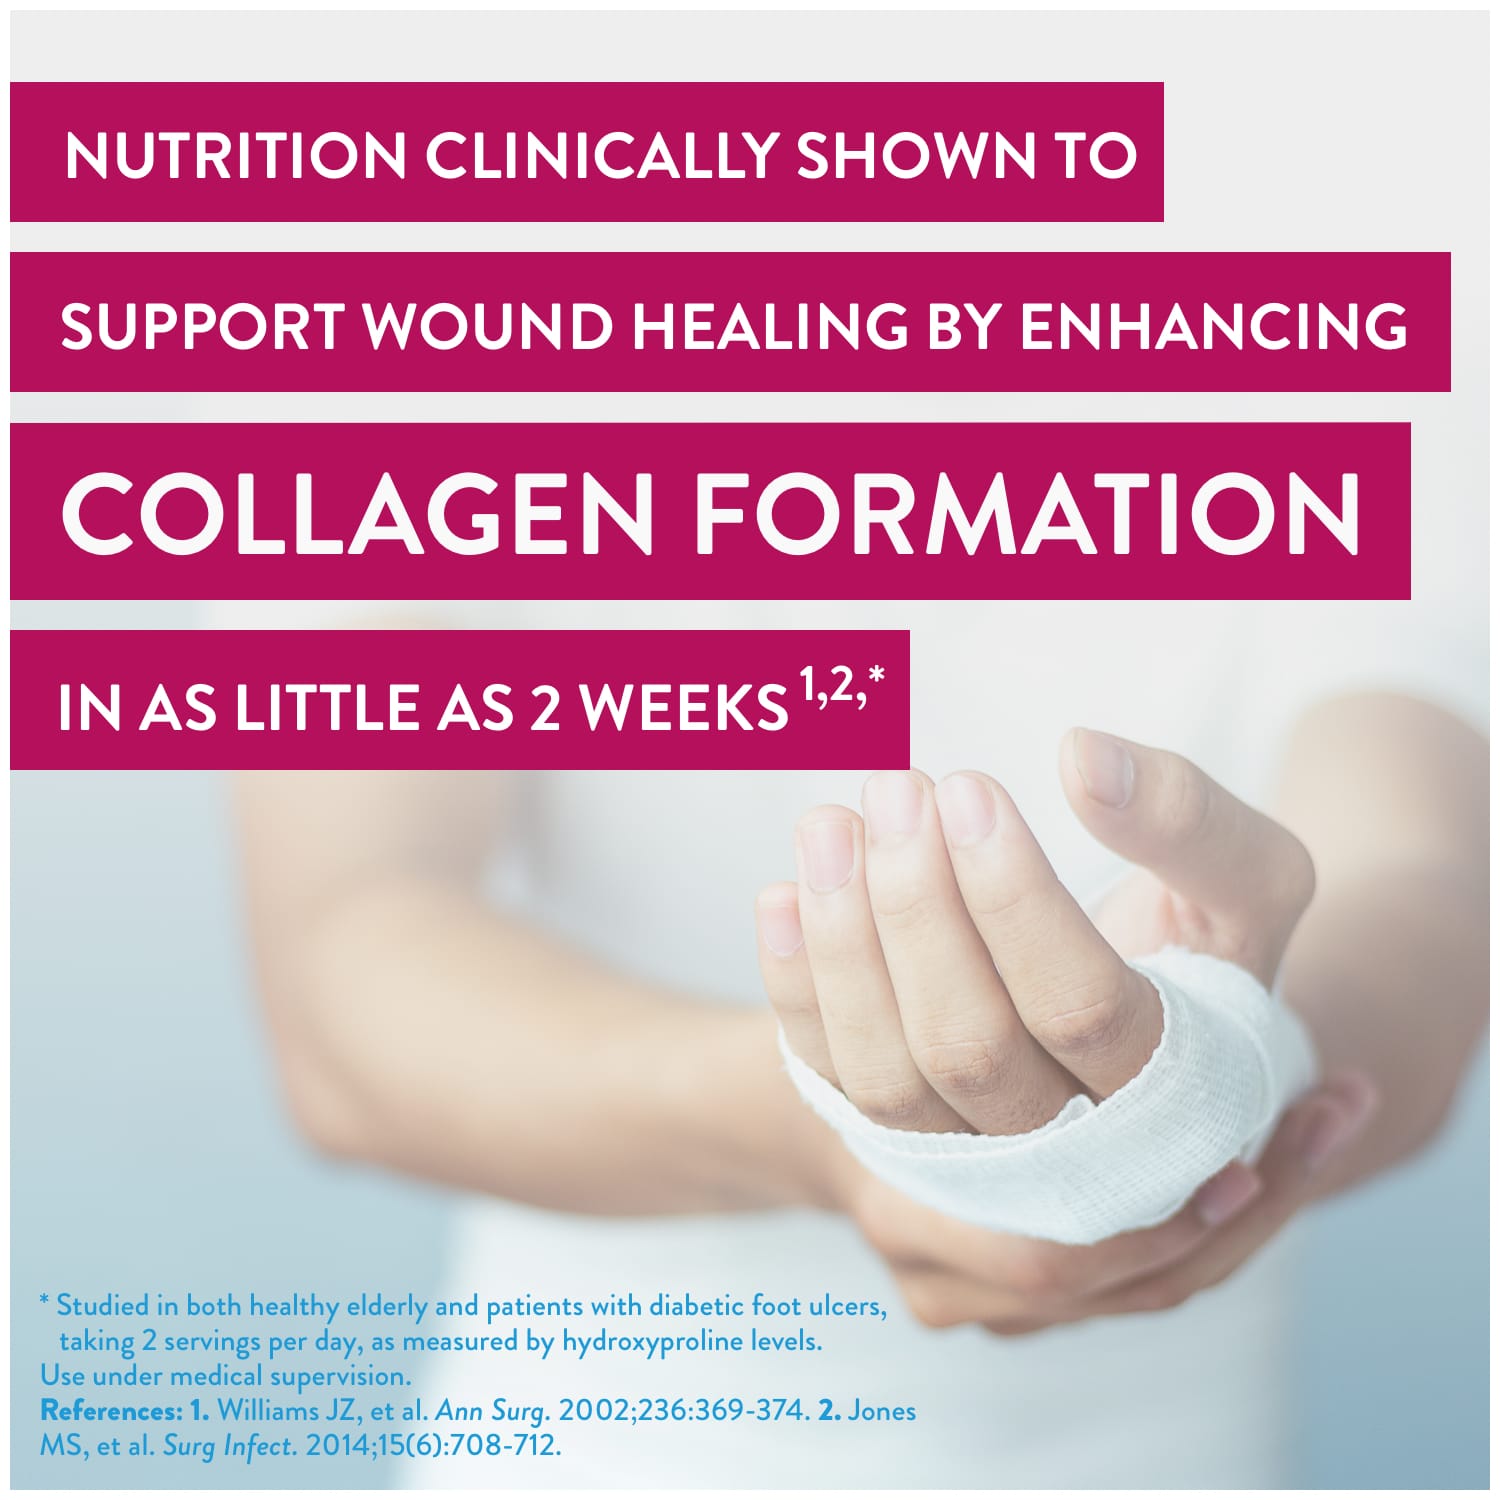 Nutrition clinically shown to support wound healing by enhanceing collagen formation in as little as 2 weeks *